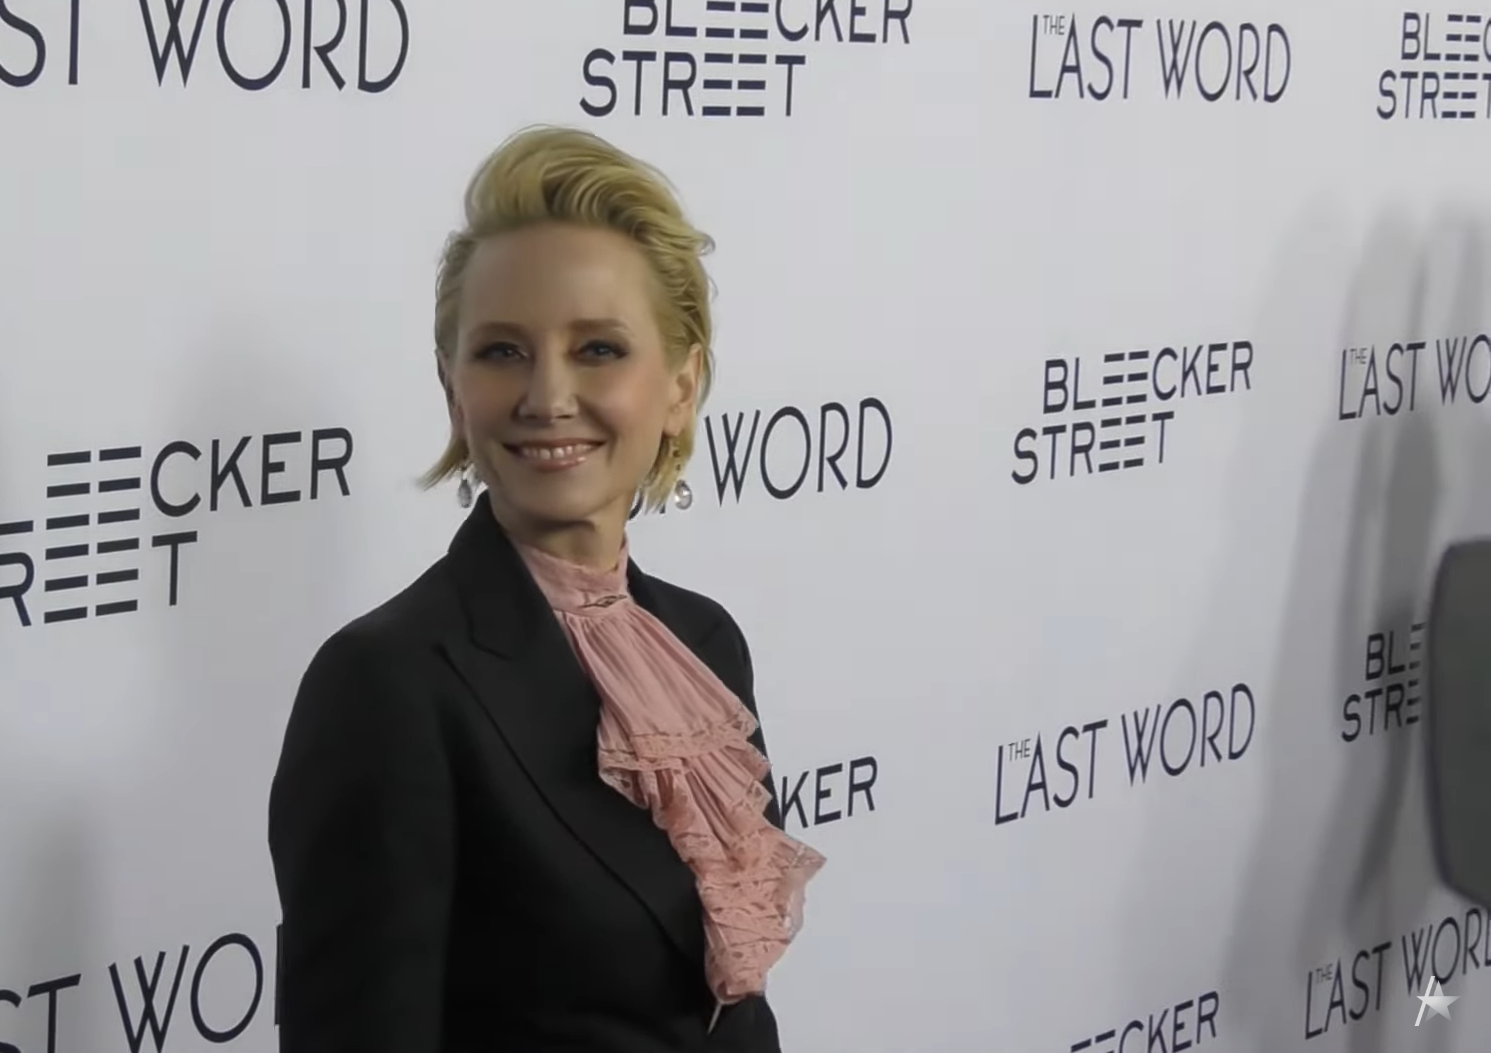 Anne Heche in a classic black suit smiling and looking on the camera